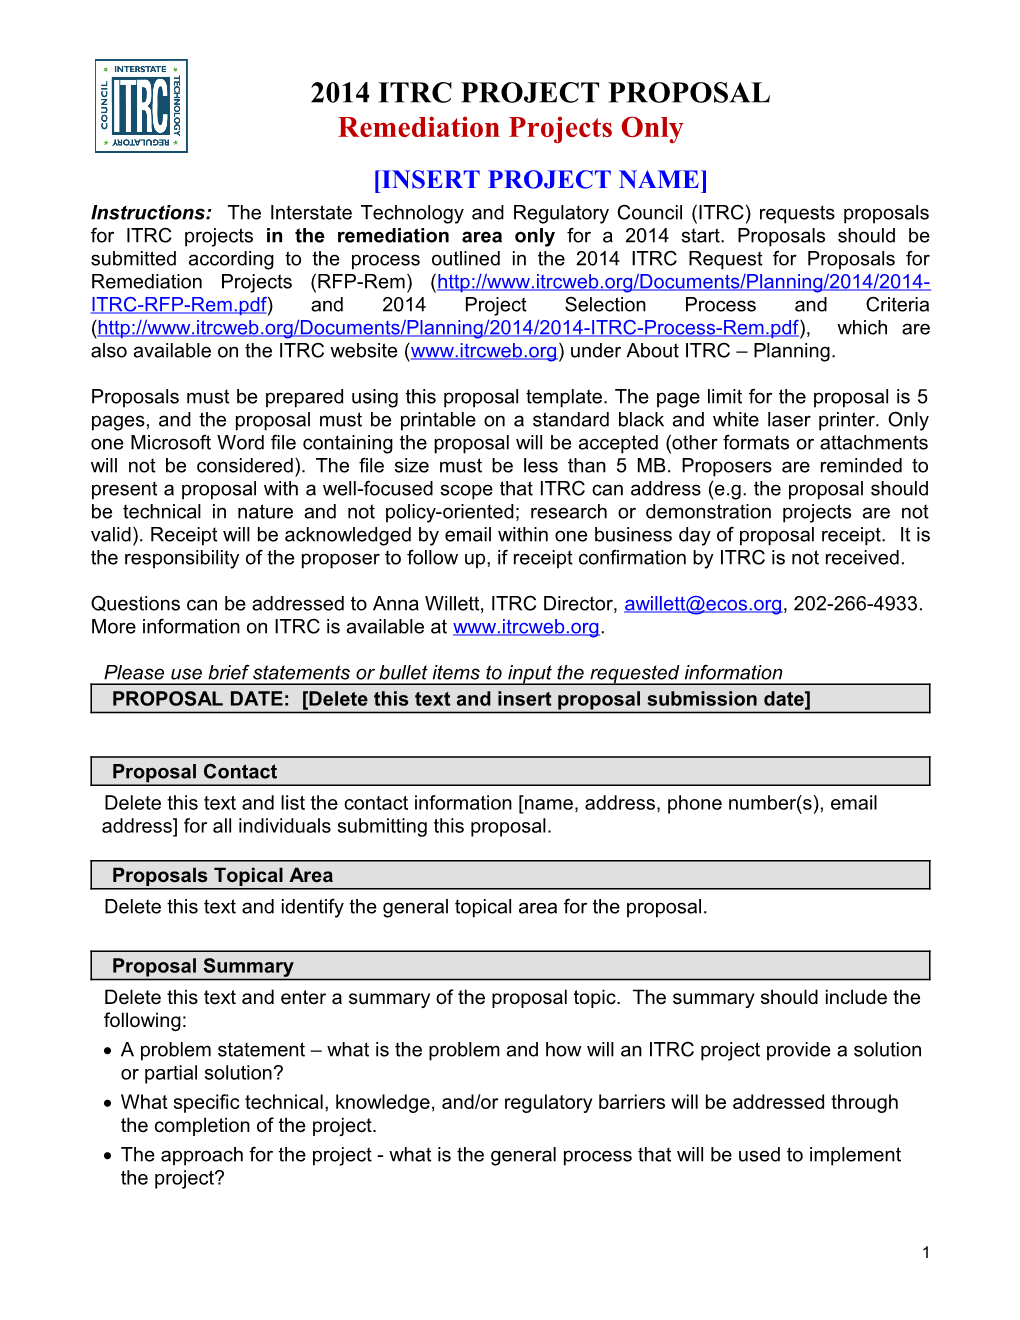 Itrc Project Proposal: Insert Project Name